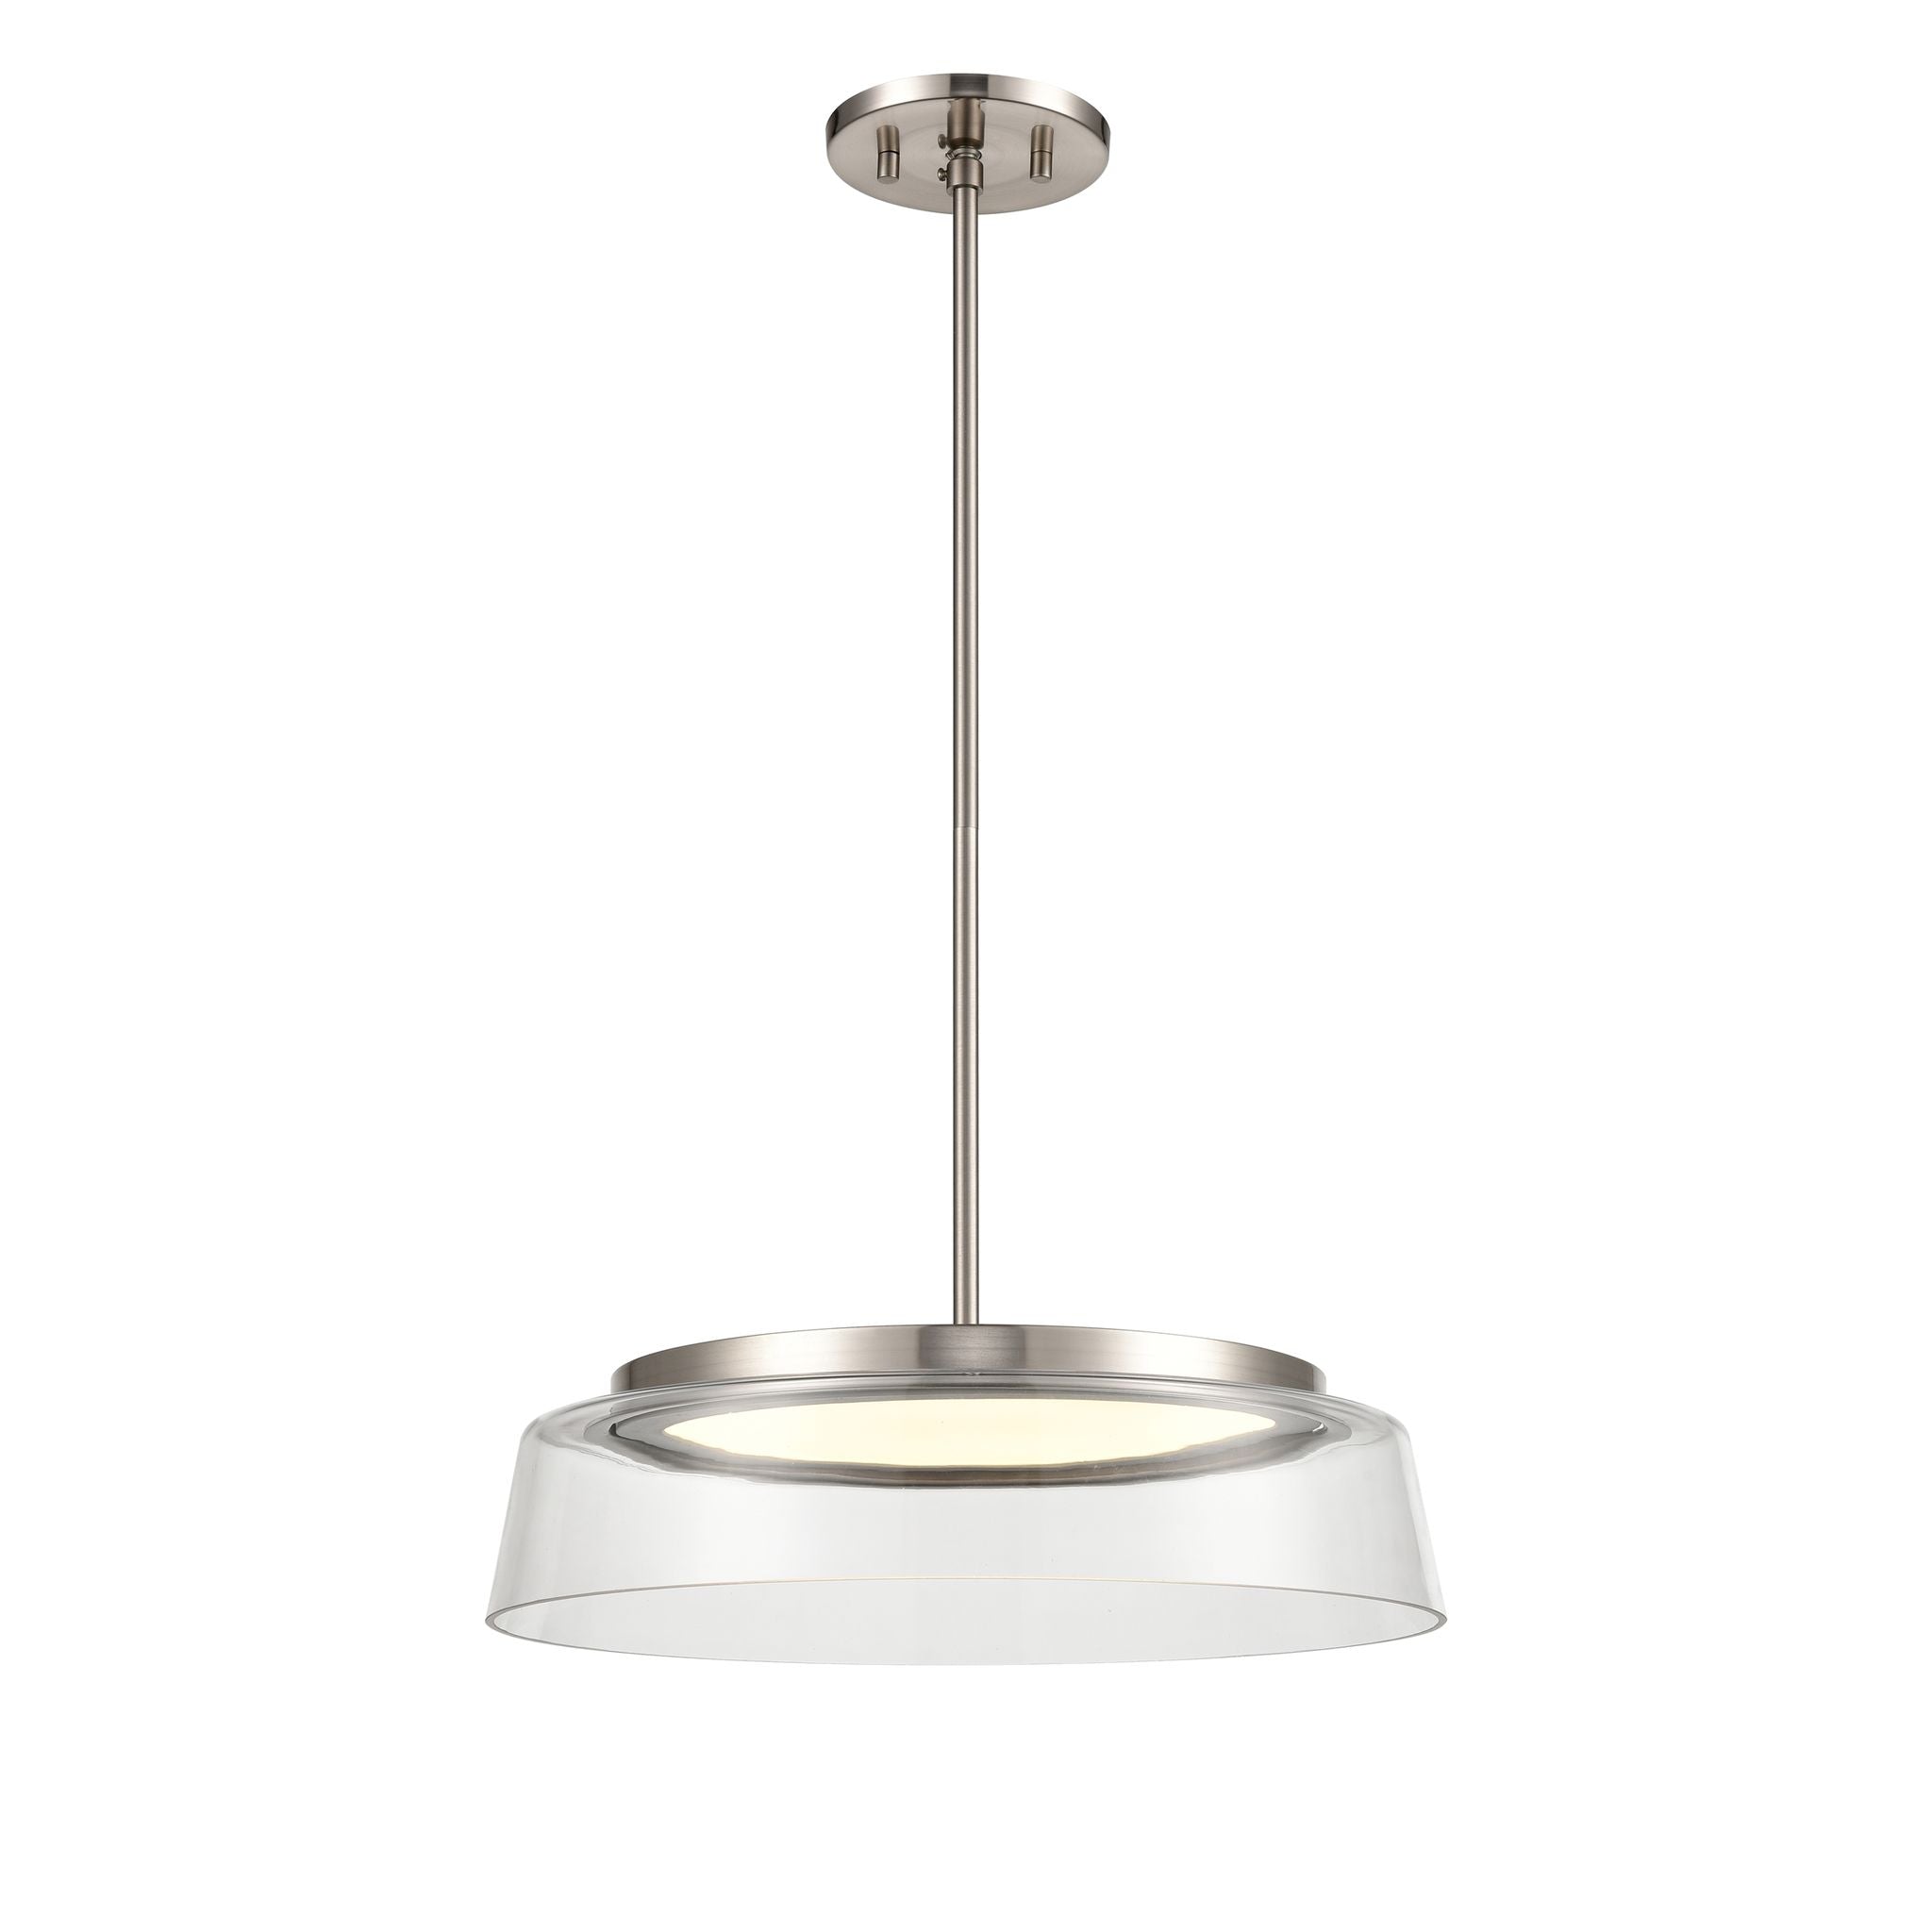 Triptych AC LED Flush mount Stainless steel INTEGRATED LED - DVP46708SN-CL | DVI